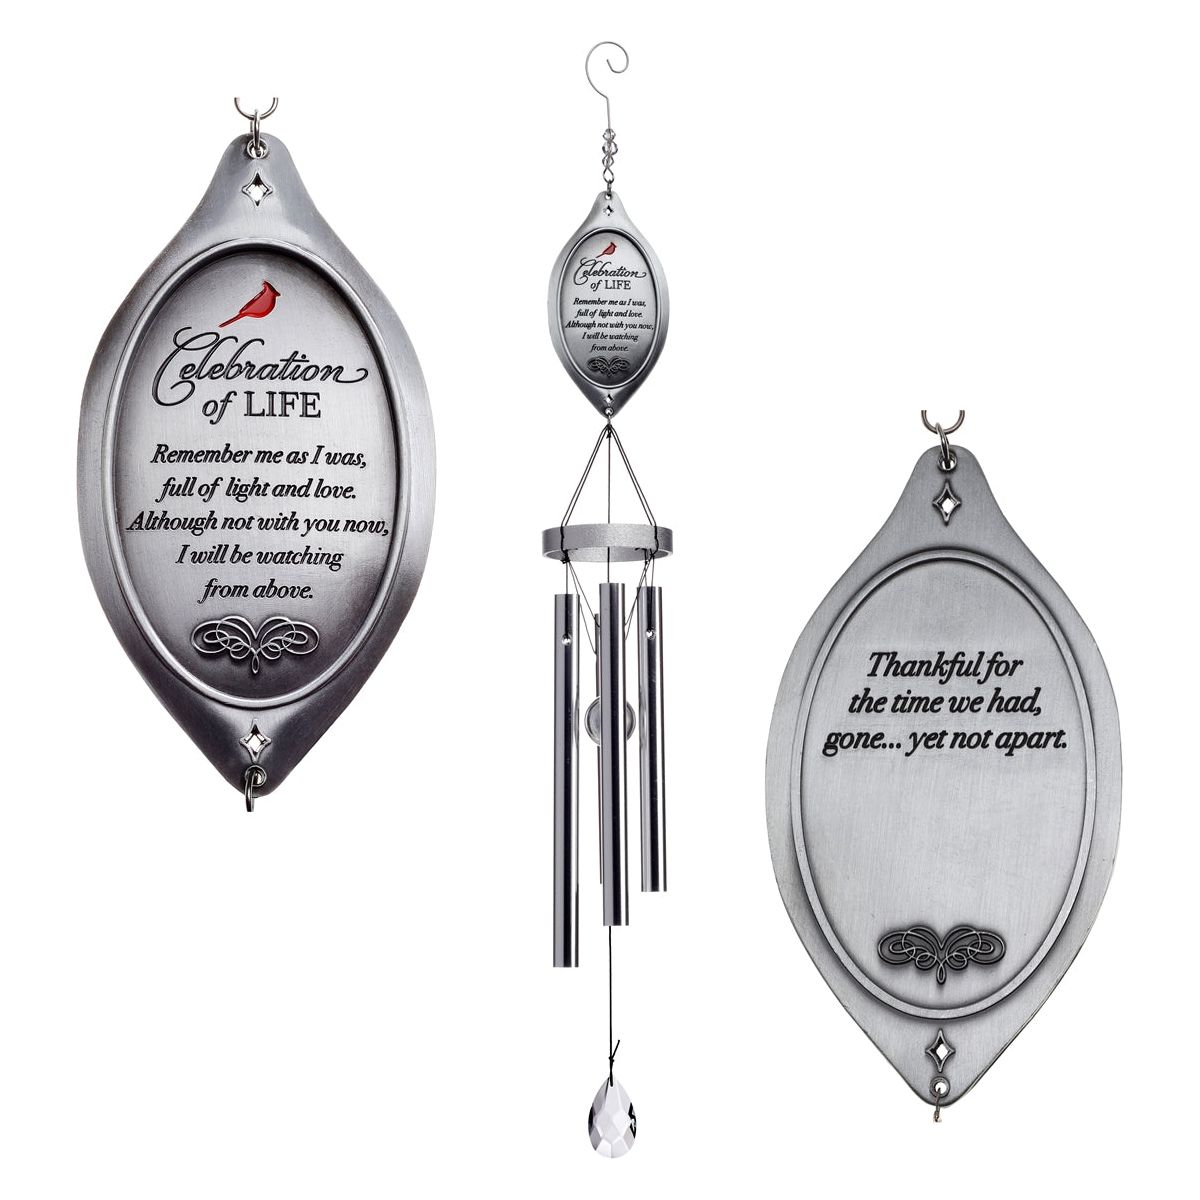 The Celebration of Life Windchime with close up views of the sentiment on front and back of the chime topper. 